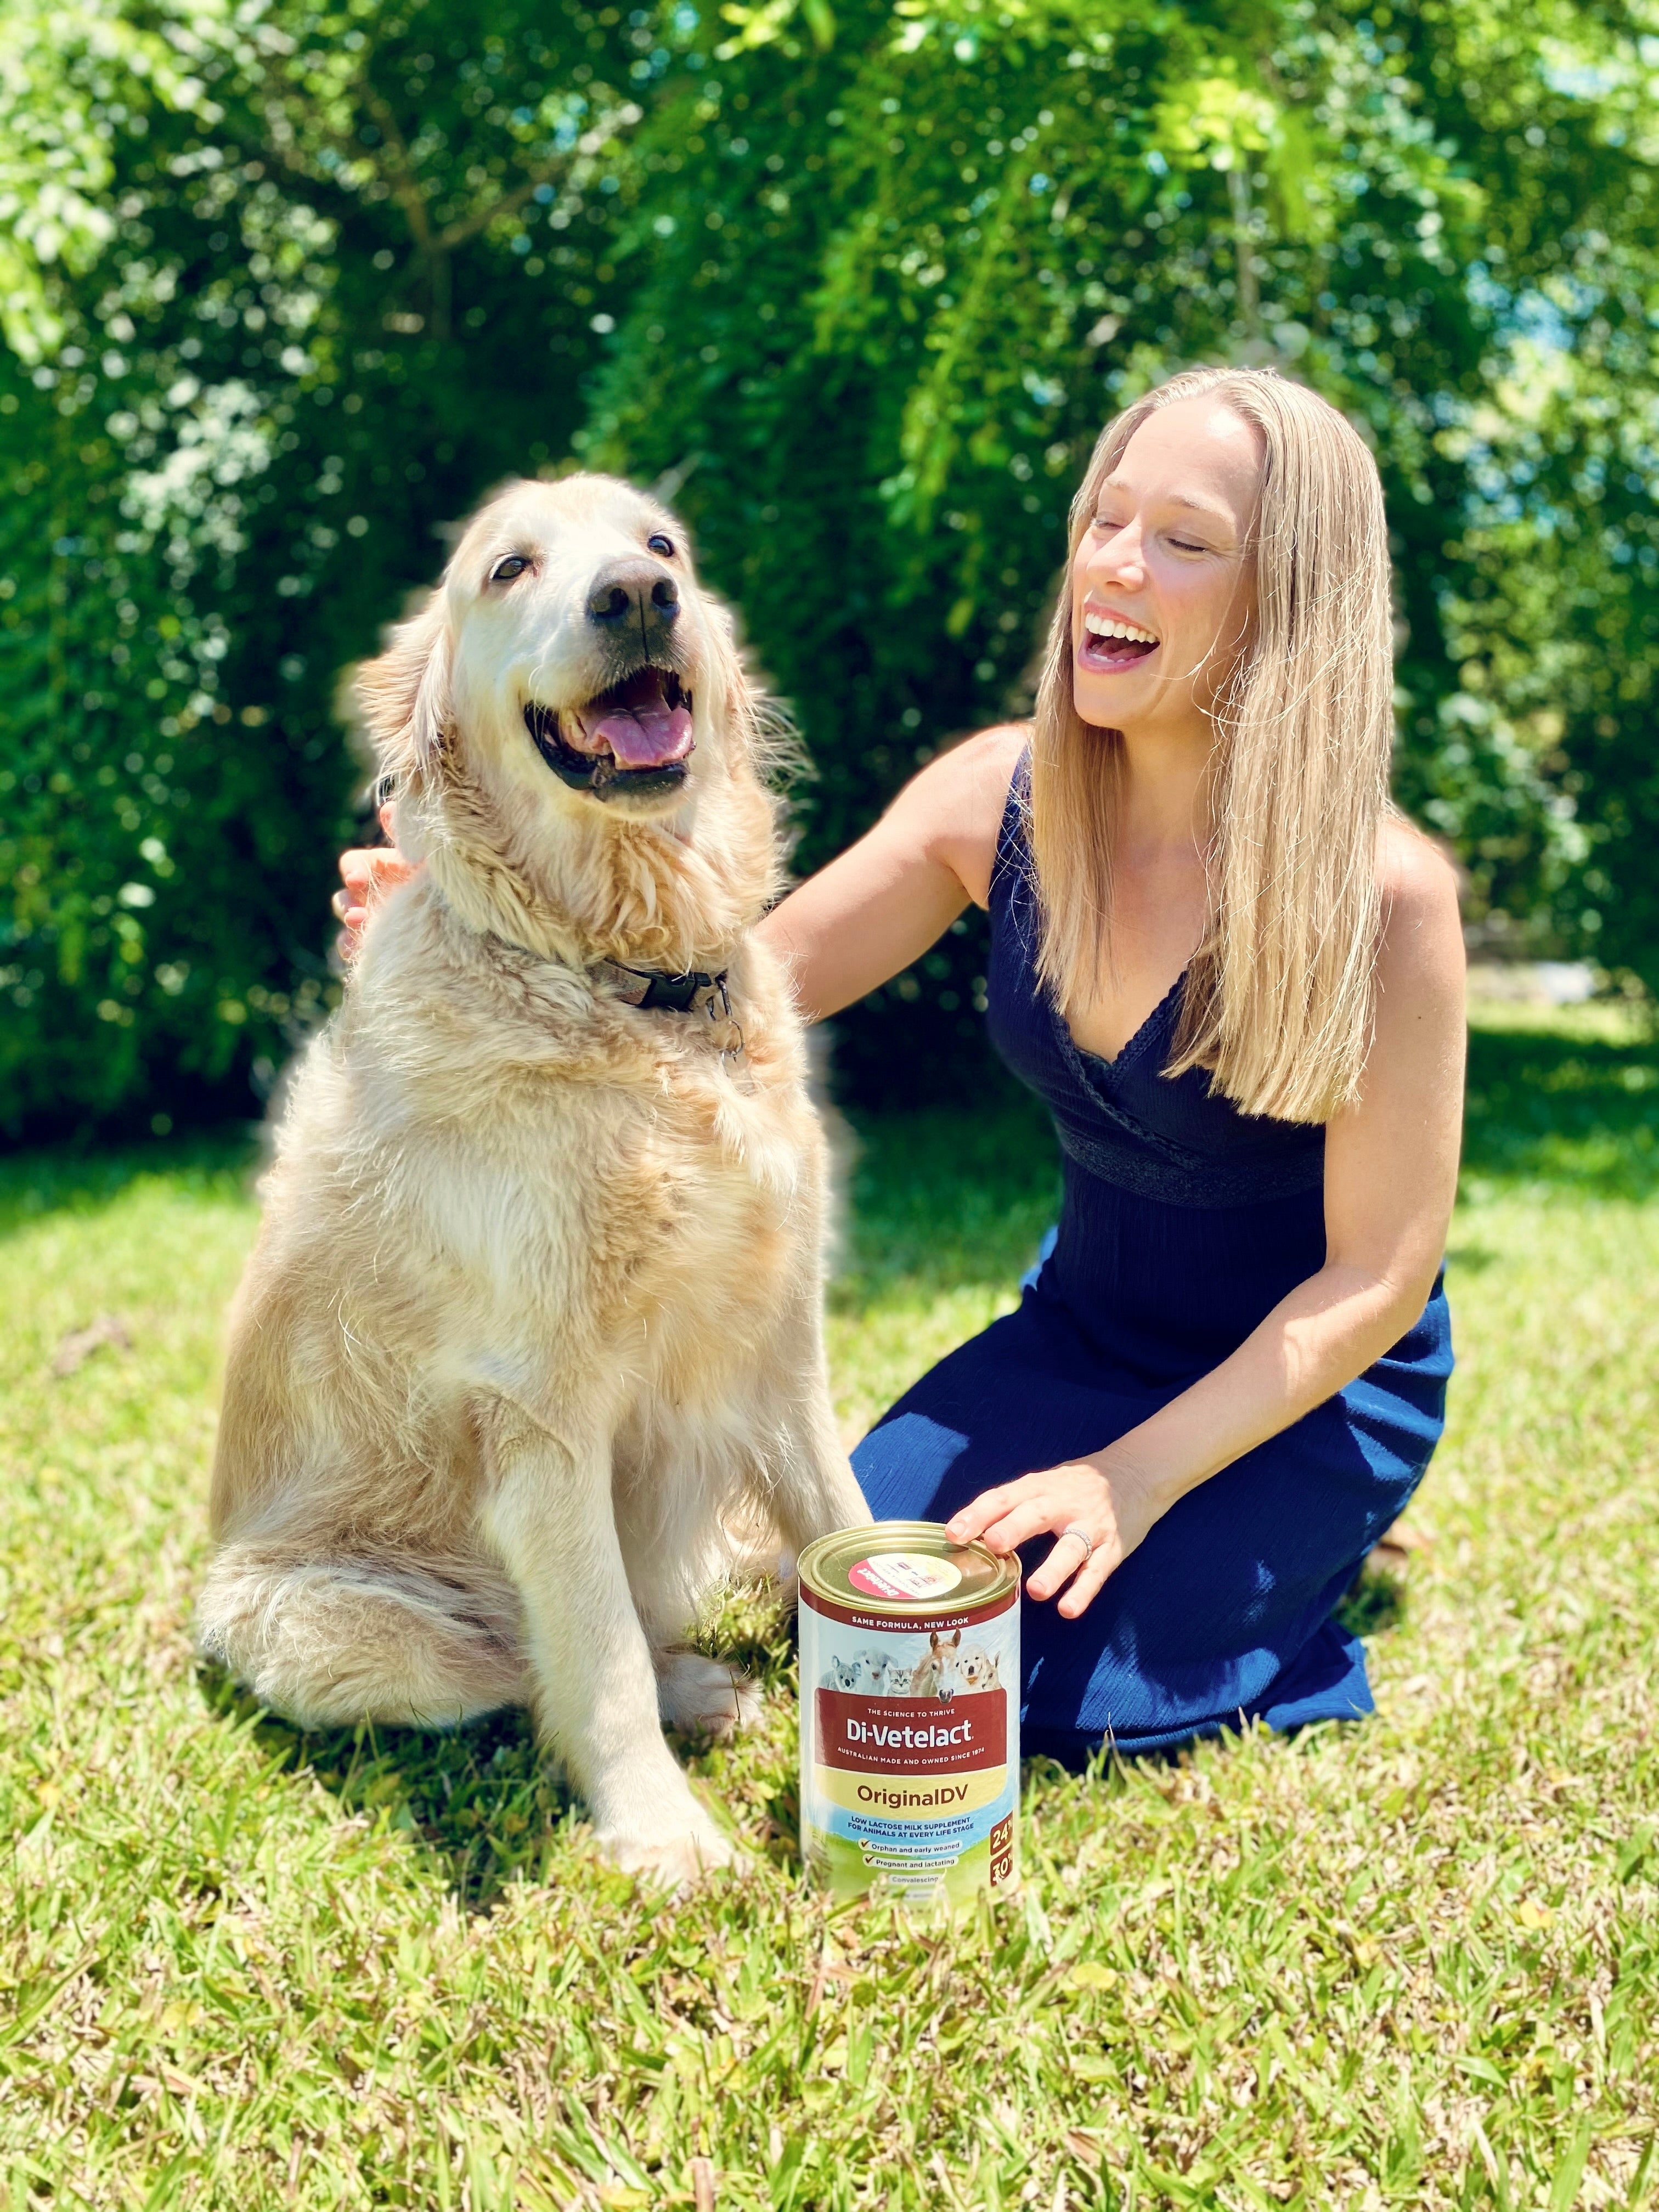 Dog and woman happy with 900g can of Di-Vetelact milk supplement for animals.